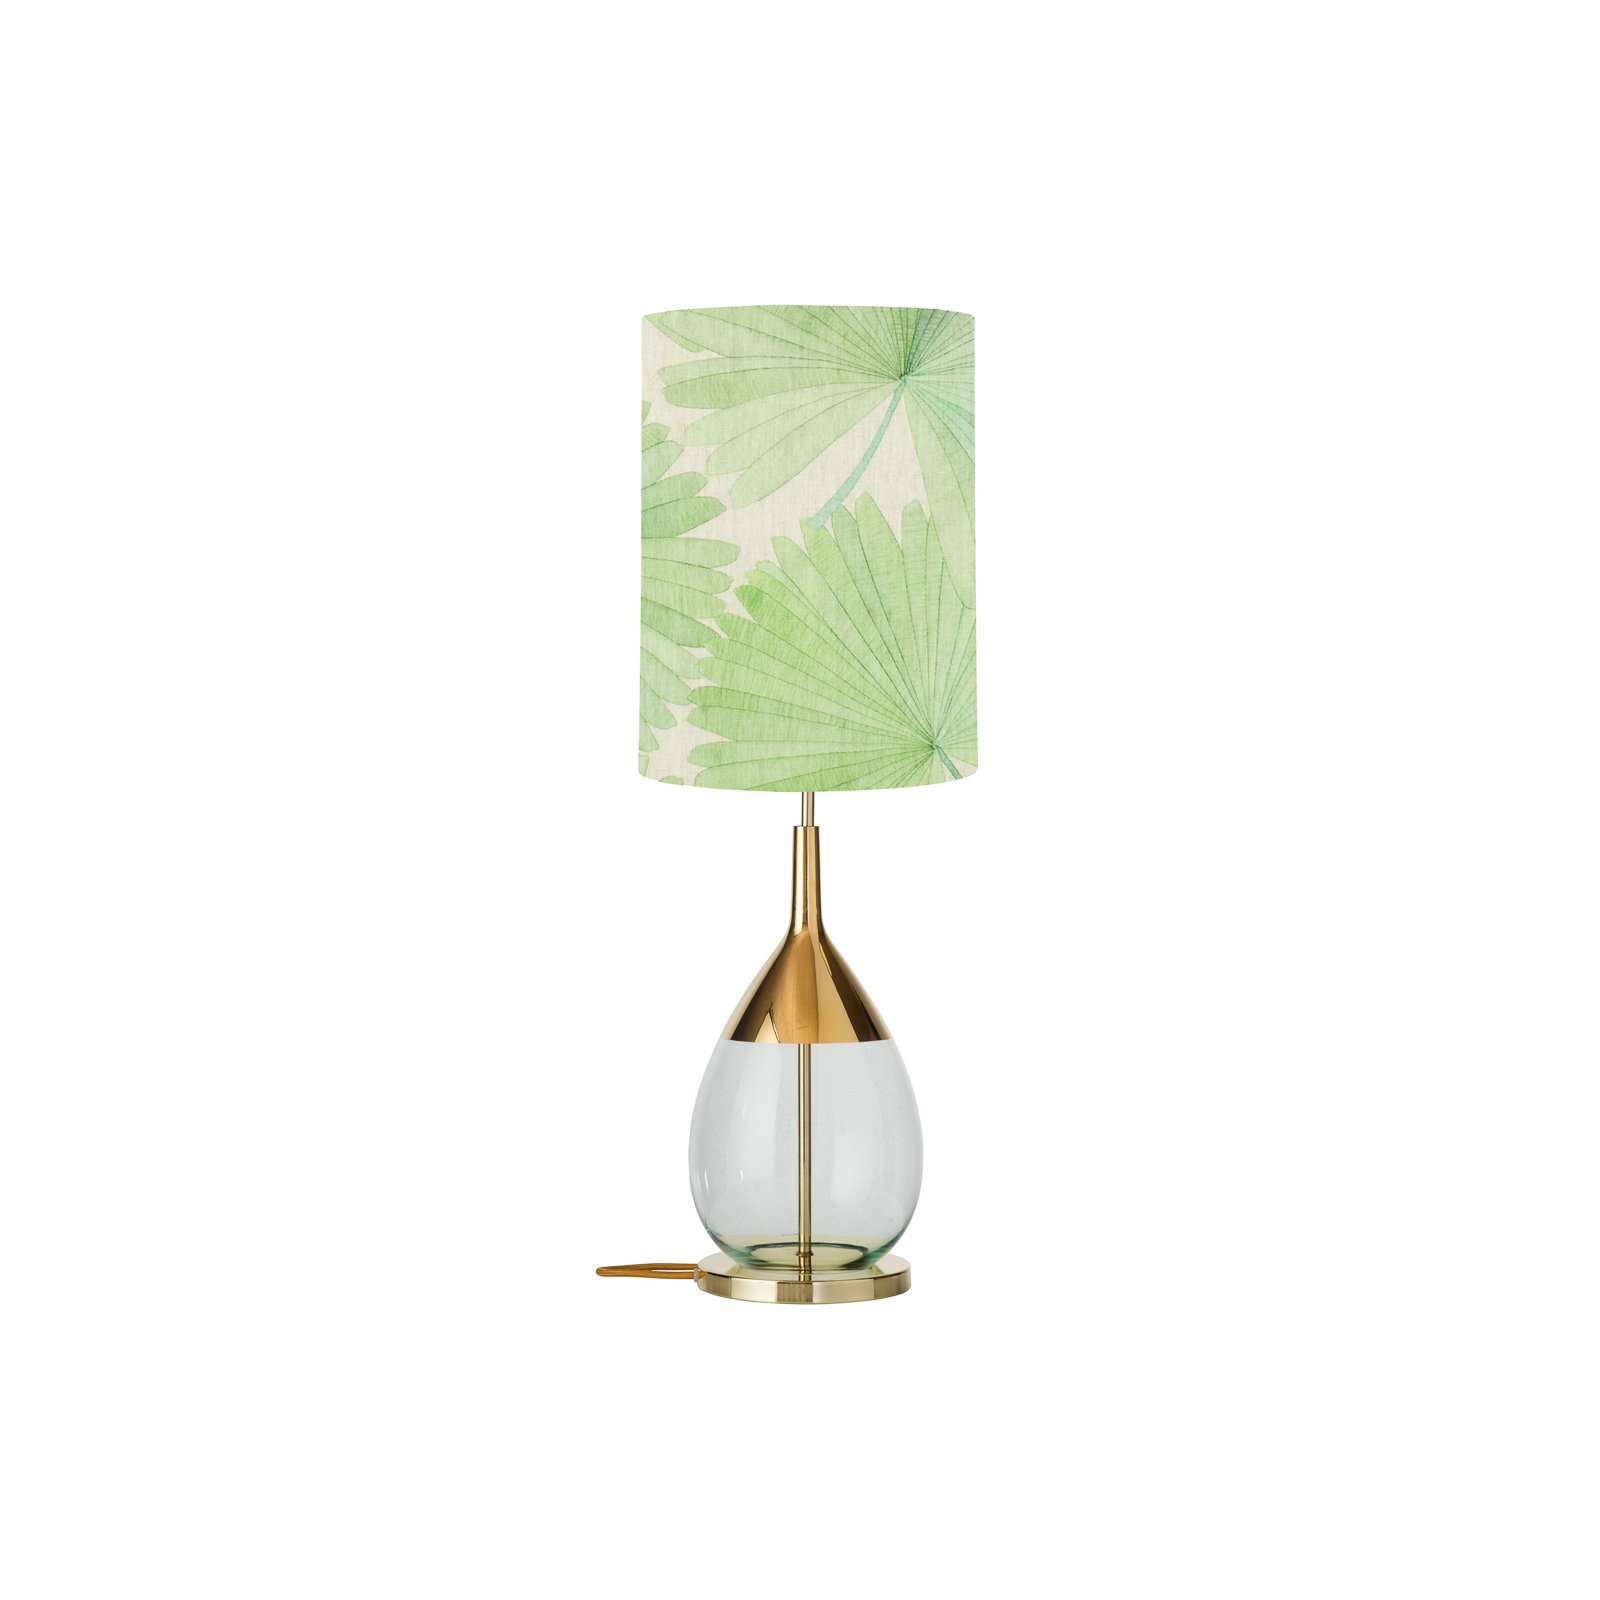 EBB & FLOW Lute table lamp Tango palm green/gold